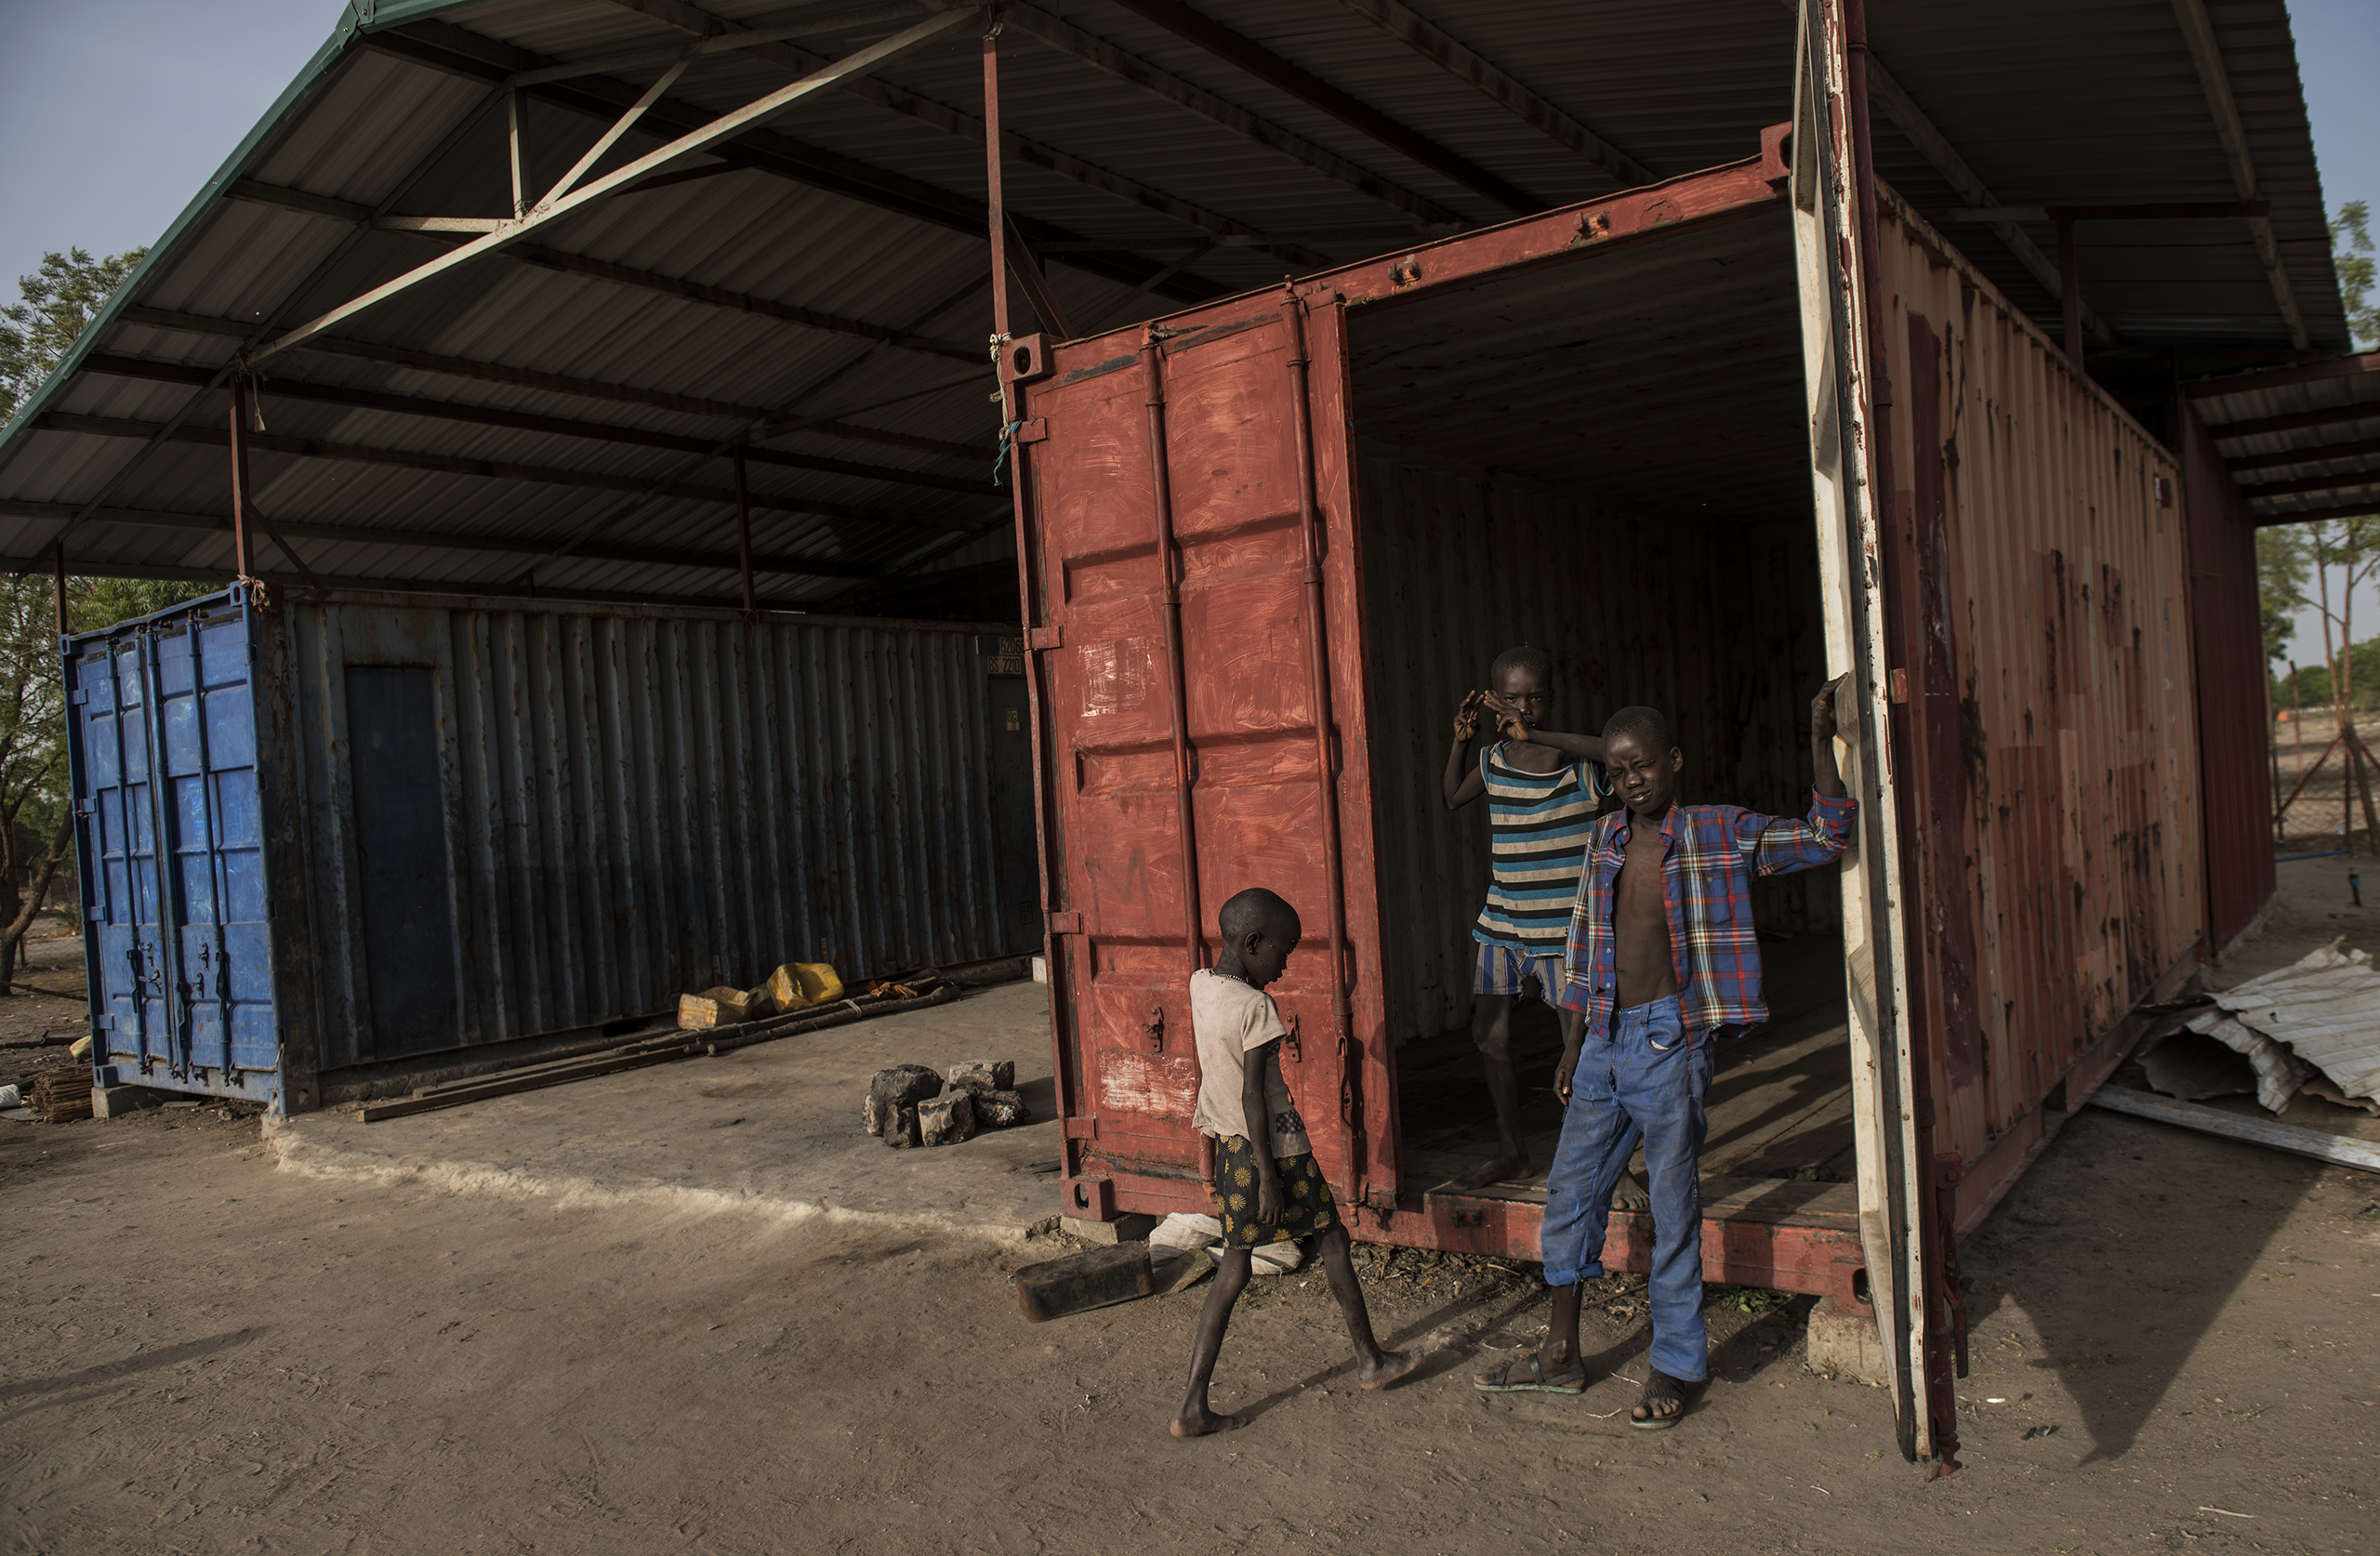 South Sudanese children play on March 20, 2016, in the containers on the church compound where, in October 2015, more than 50 men were locked inside a container and died. One 13-year-old boy survived. (Lynsey Addario—Getty Images Reportage for TIME)